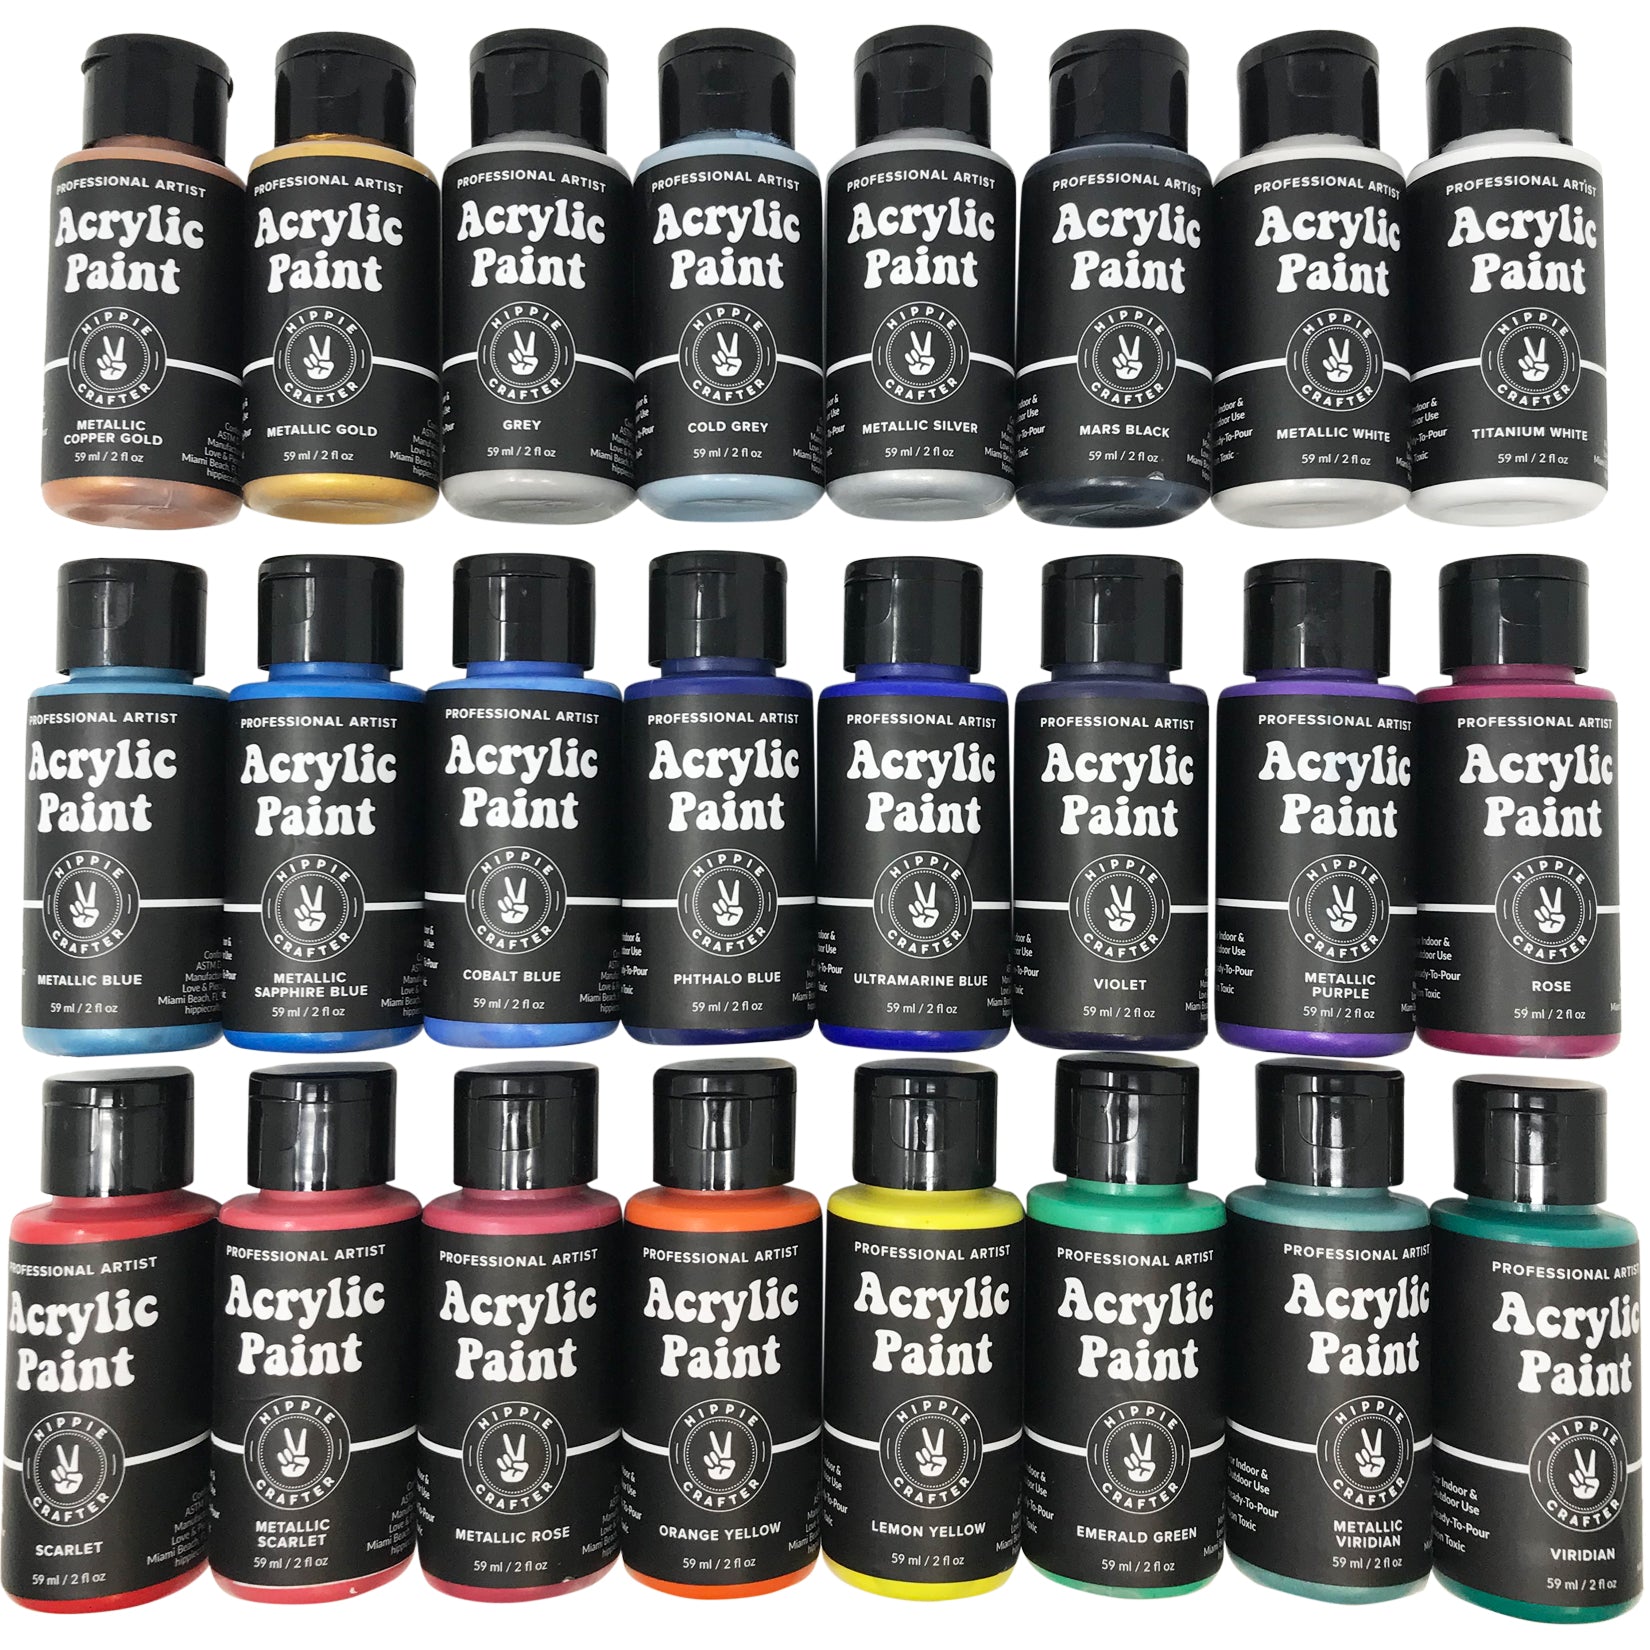 Hippie Crafter Craft Paint Acrylic Premium Acrylic Paint Set 20 Colors Paint Acrylic | Canvas Paint Ceramic Outdoor Wood Clay Glass Rock Painting 2oz